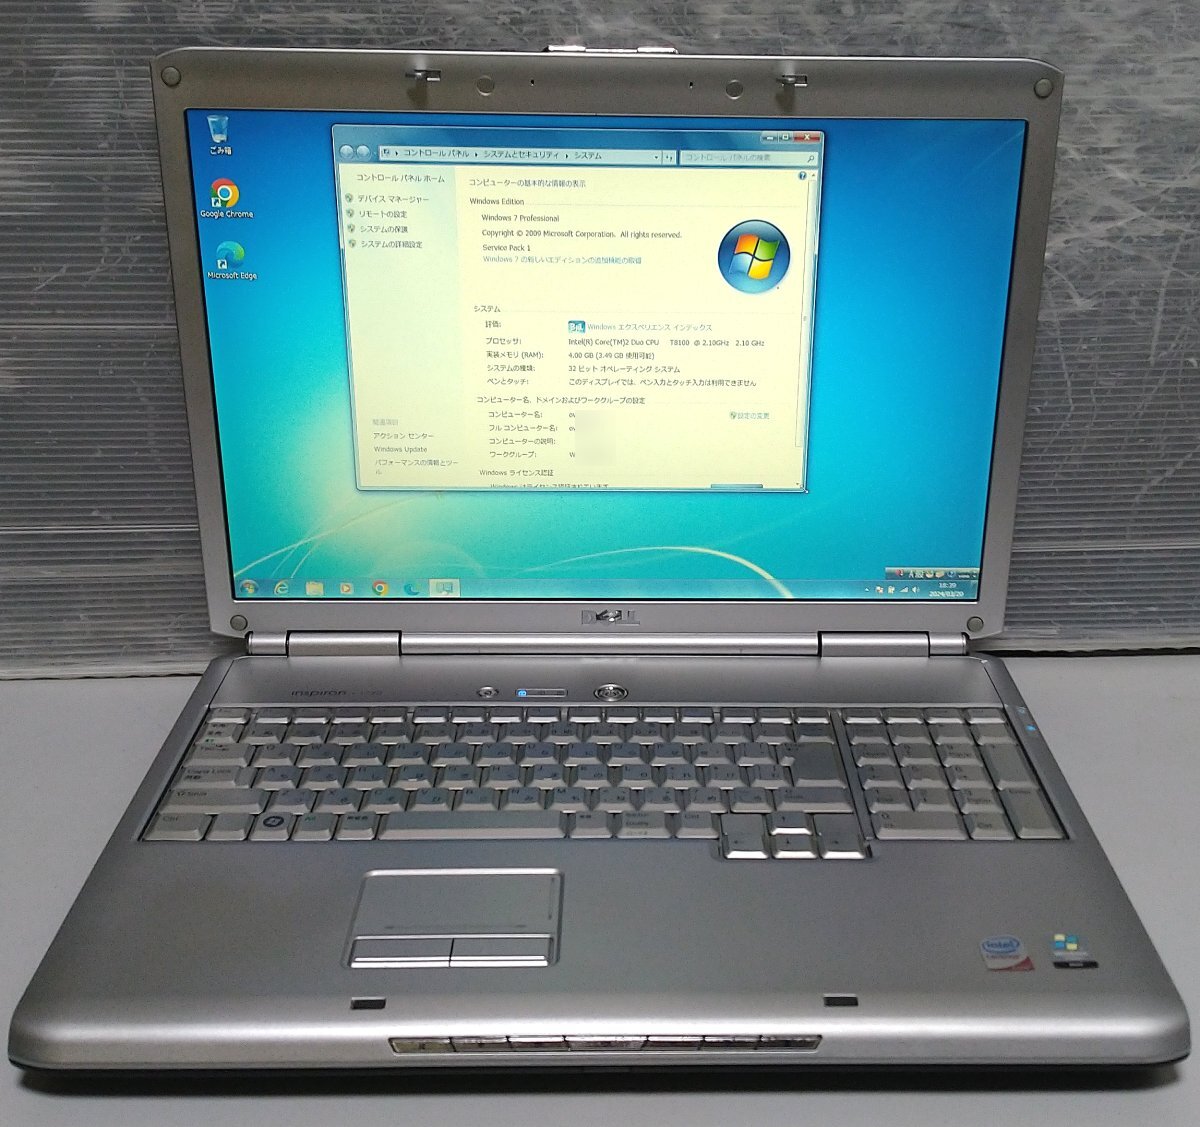  immediate payment free shipping present condition goods Windows7 Pro 32bit Note PC Dell Inspiron1720 Core2 Duo T8100 memory 4G HDD250GB WIFI 17 type WXGA+ certainly contents verification 